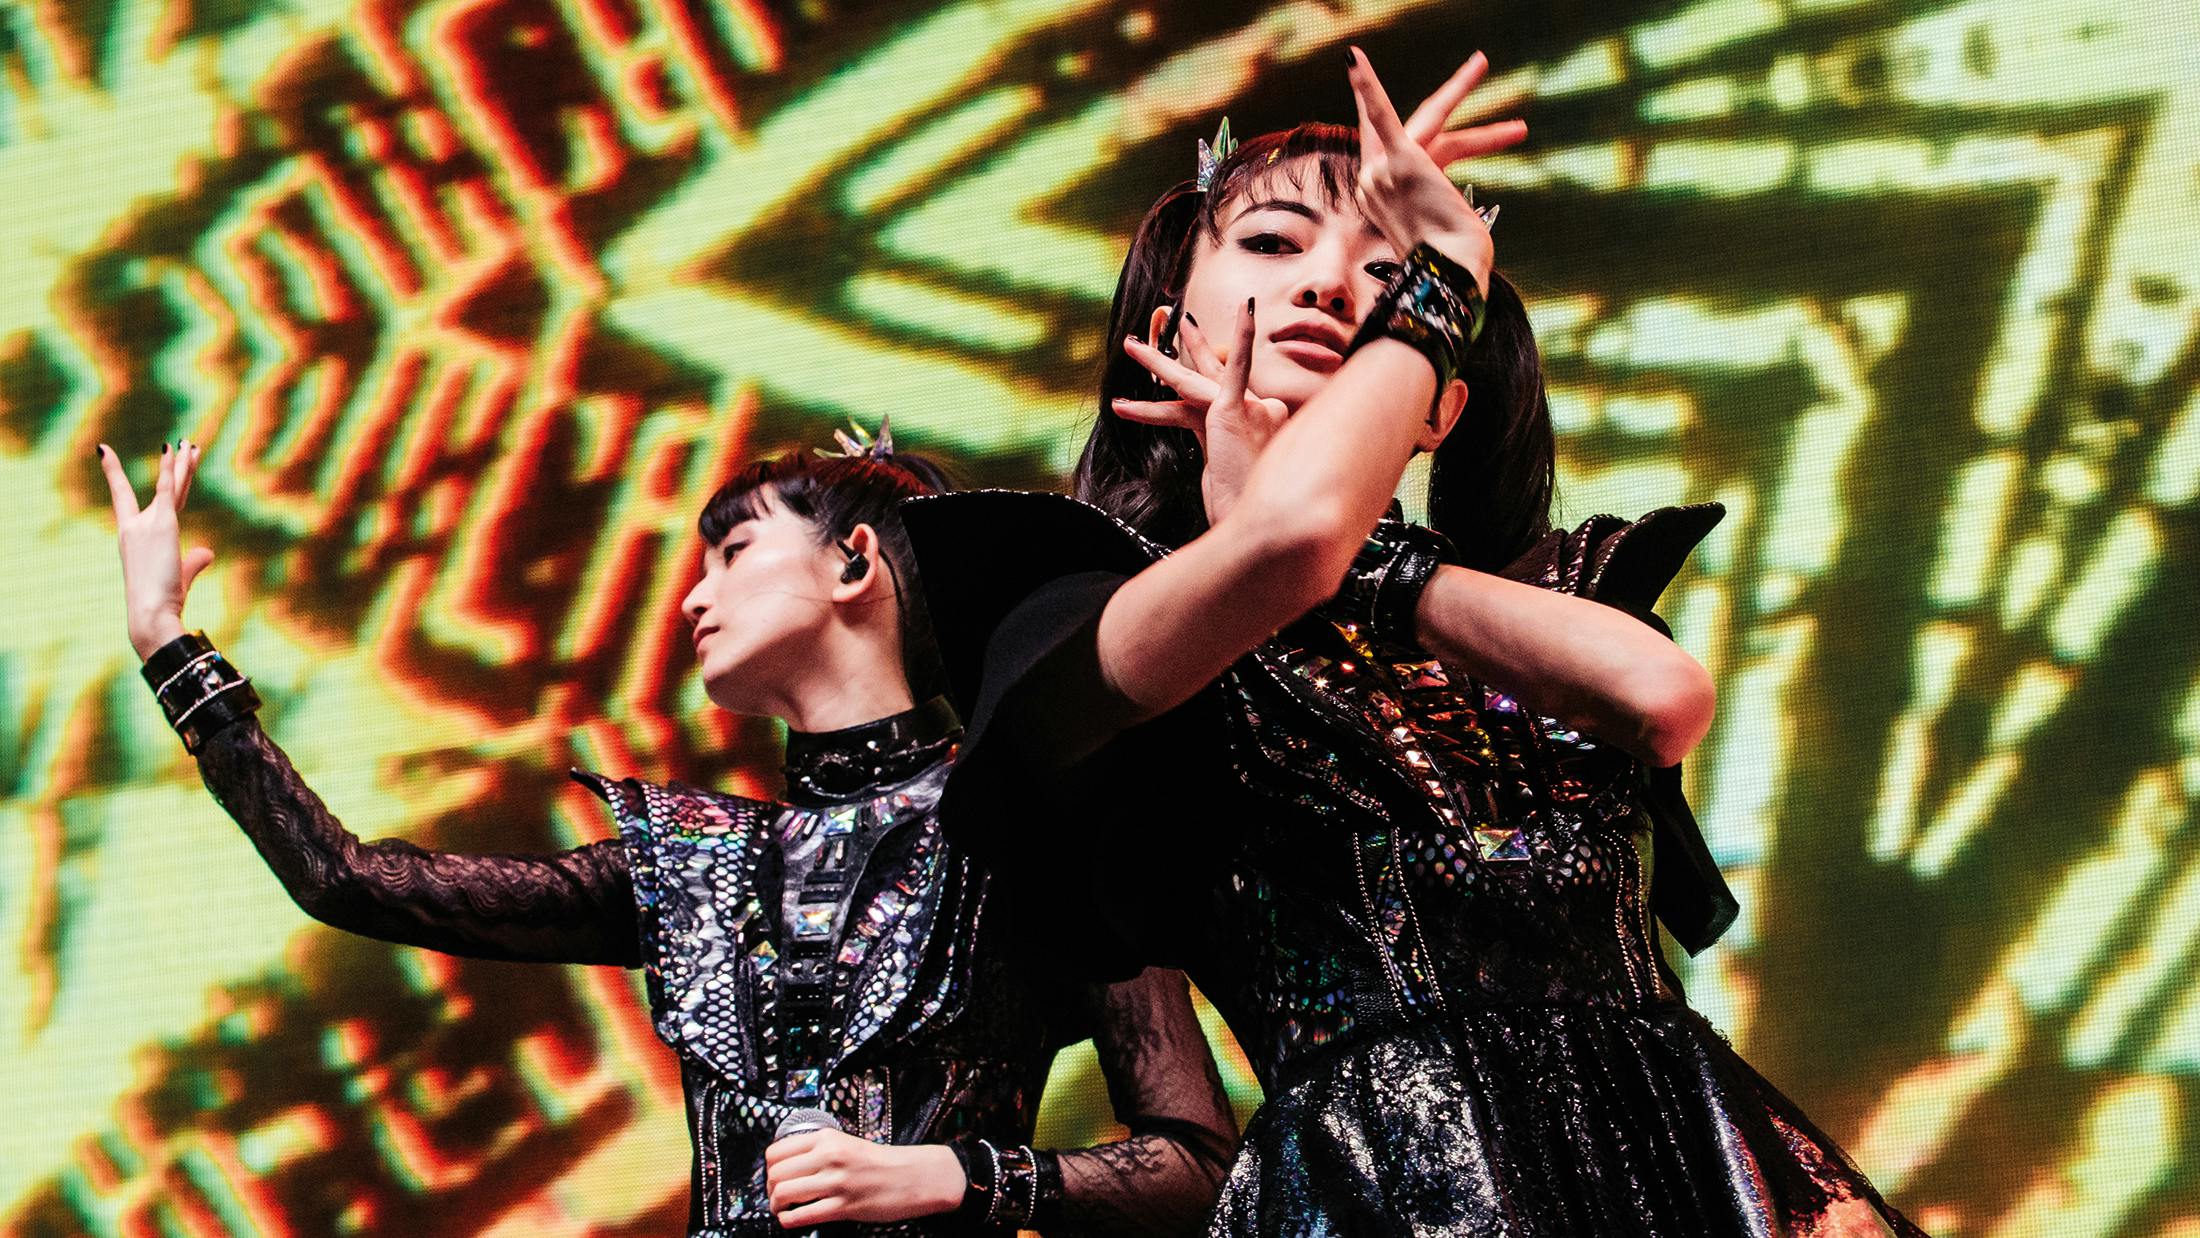 BABYMETAL’s upcoming headline shows will have a ‘silent’ mosh-pit area